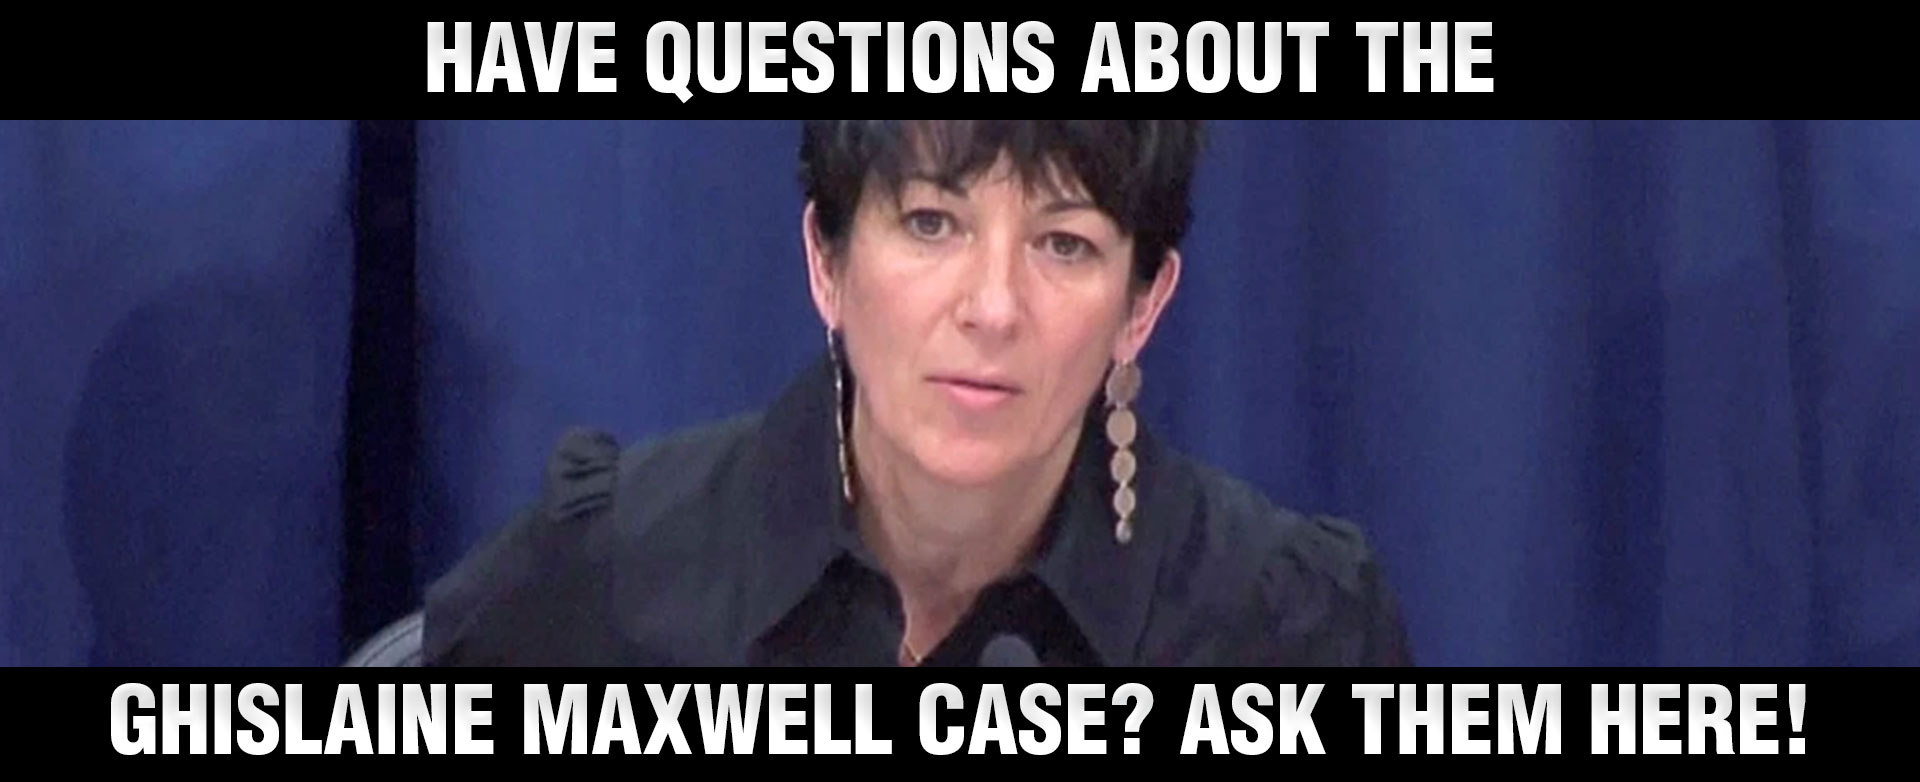 MyPatriotsNetwork-Have Questions About The Ghislaine Maxwell Case? Ask Them Here!